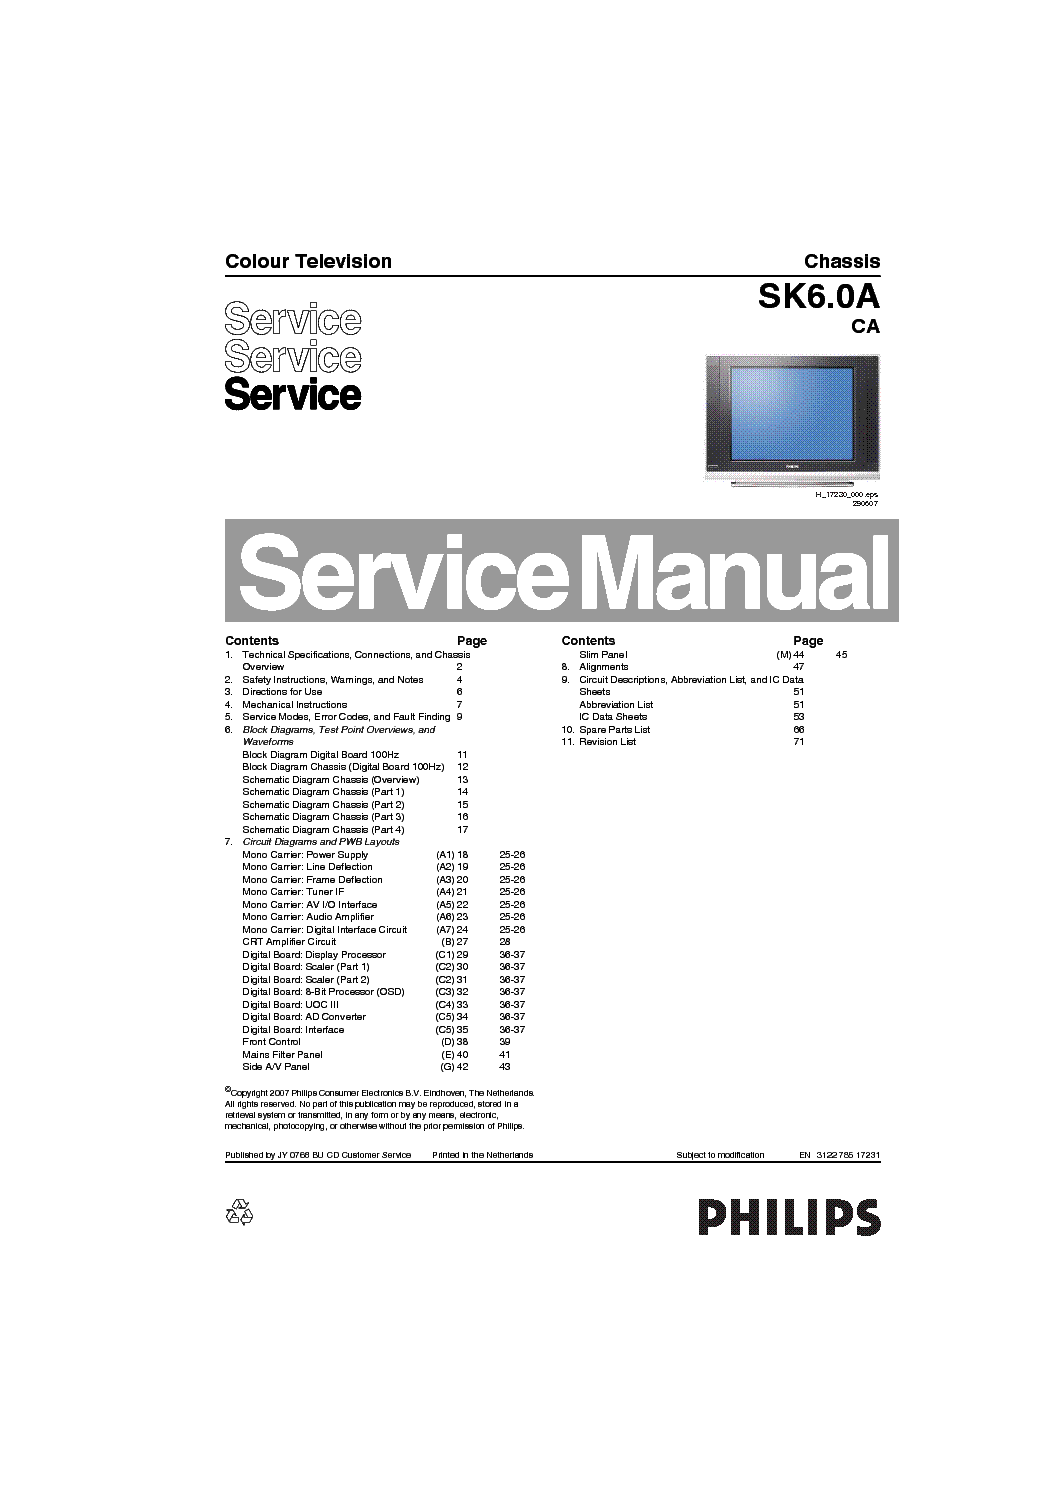 PHILIPS SK6.0A CA CHASSIS SM service manual (1st page)